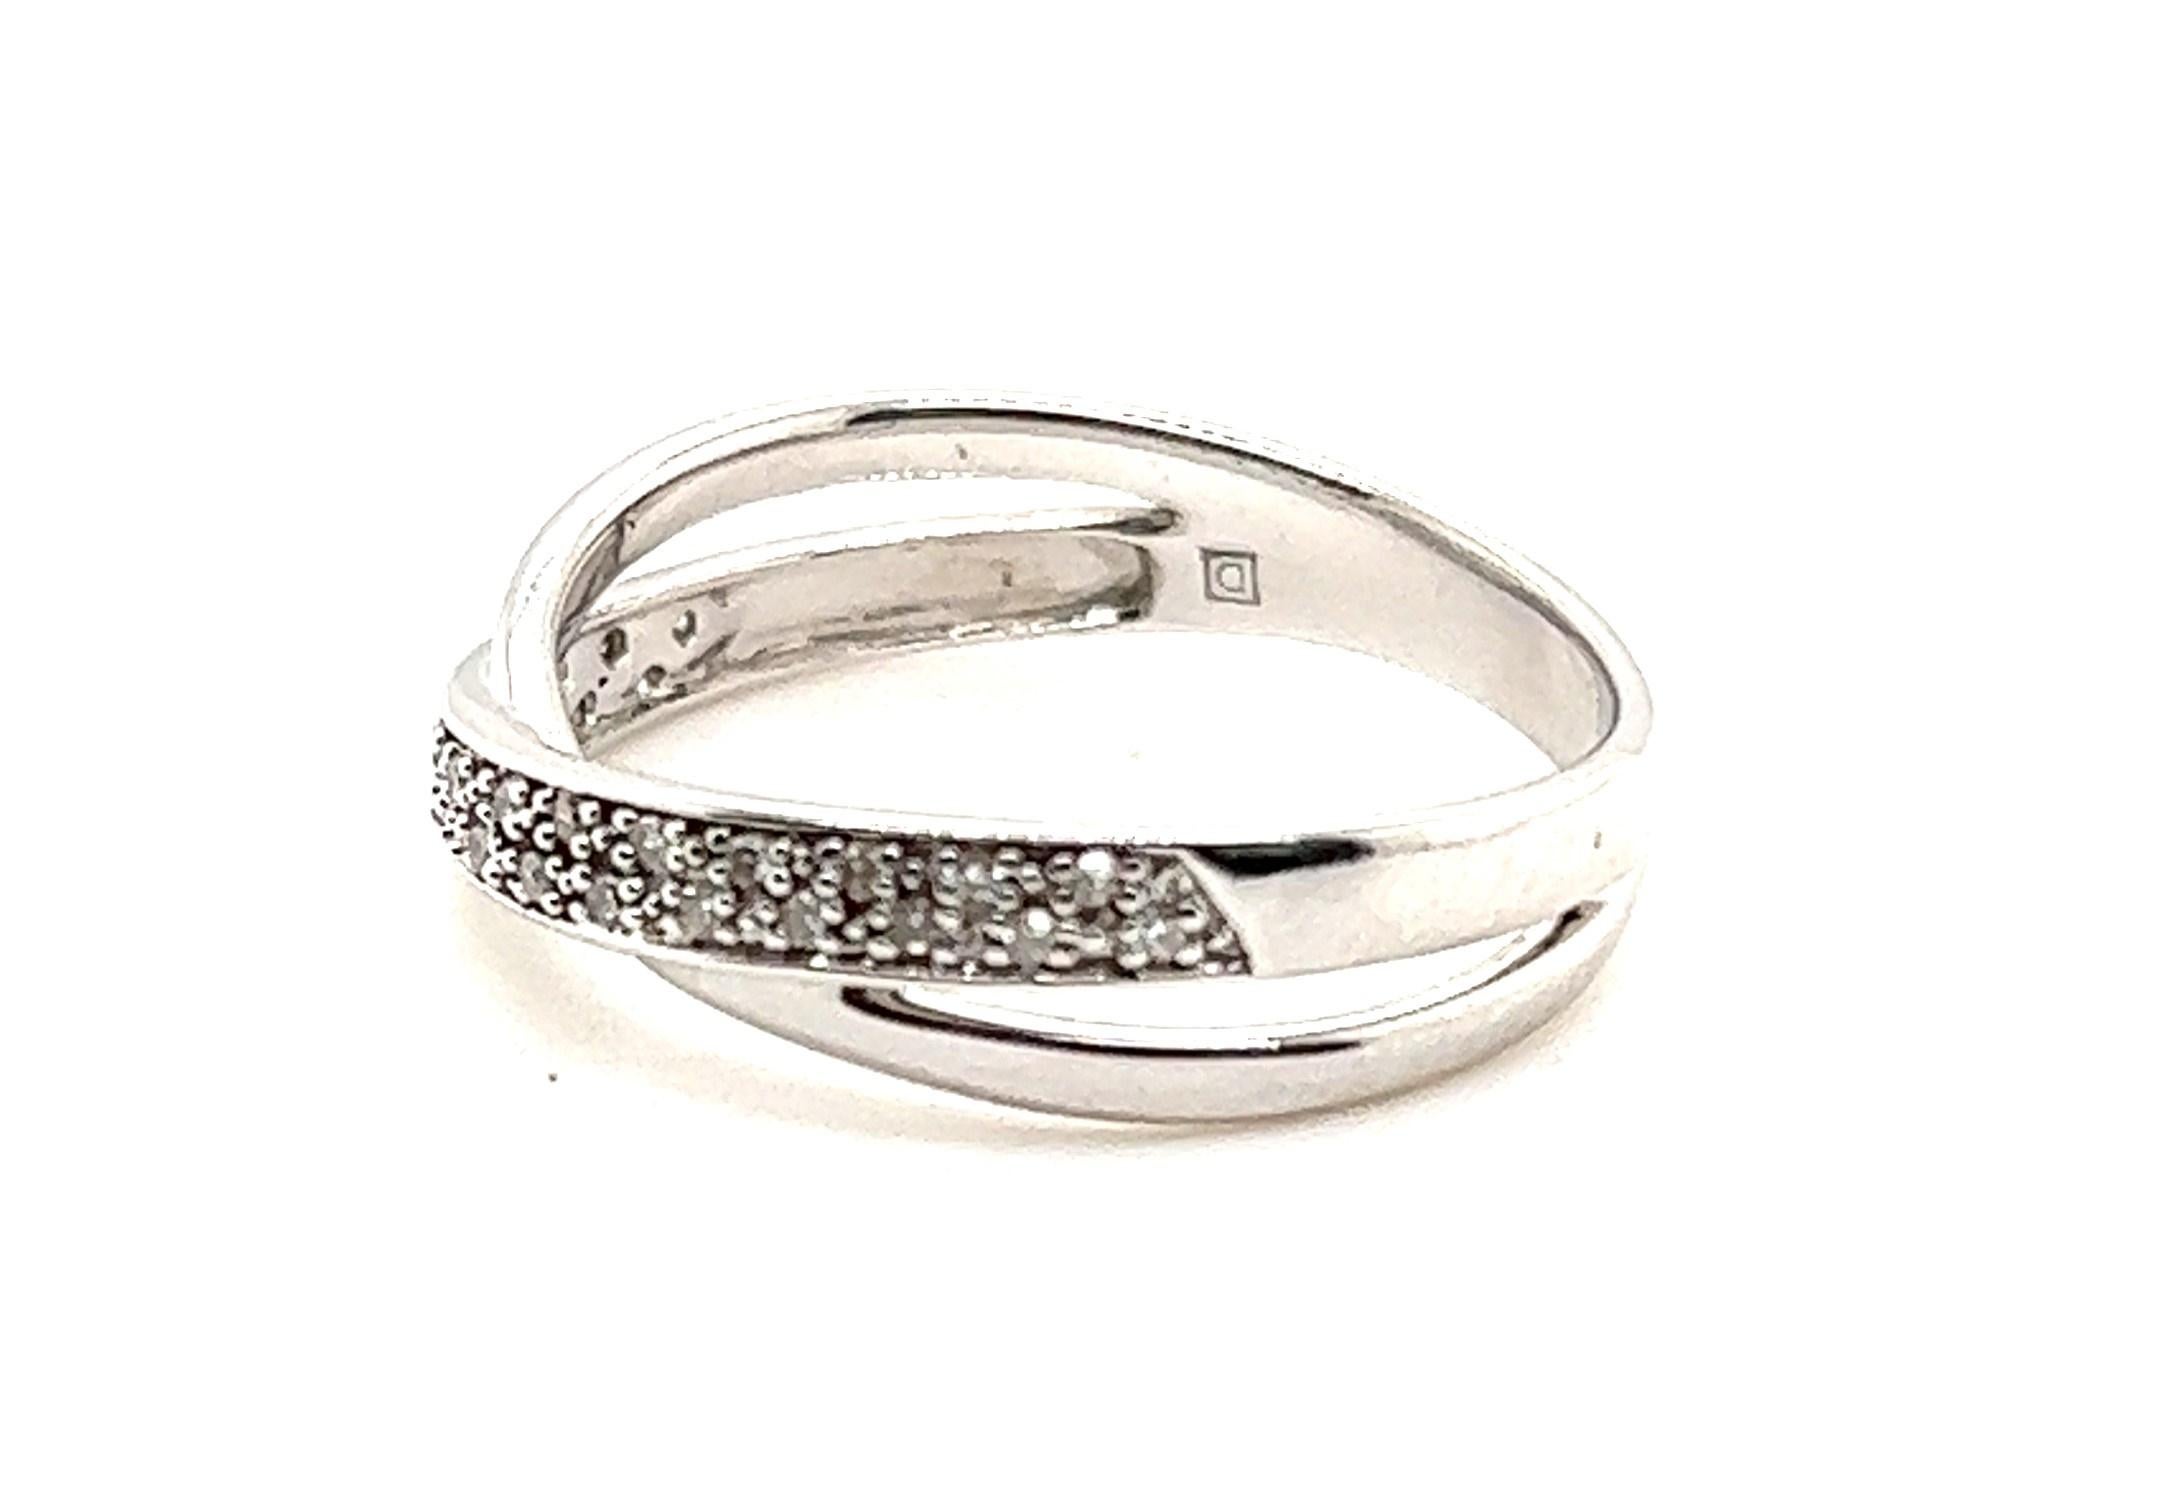 10kt white gold crossover style ring. The ring contains one 